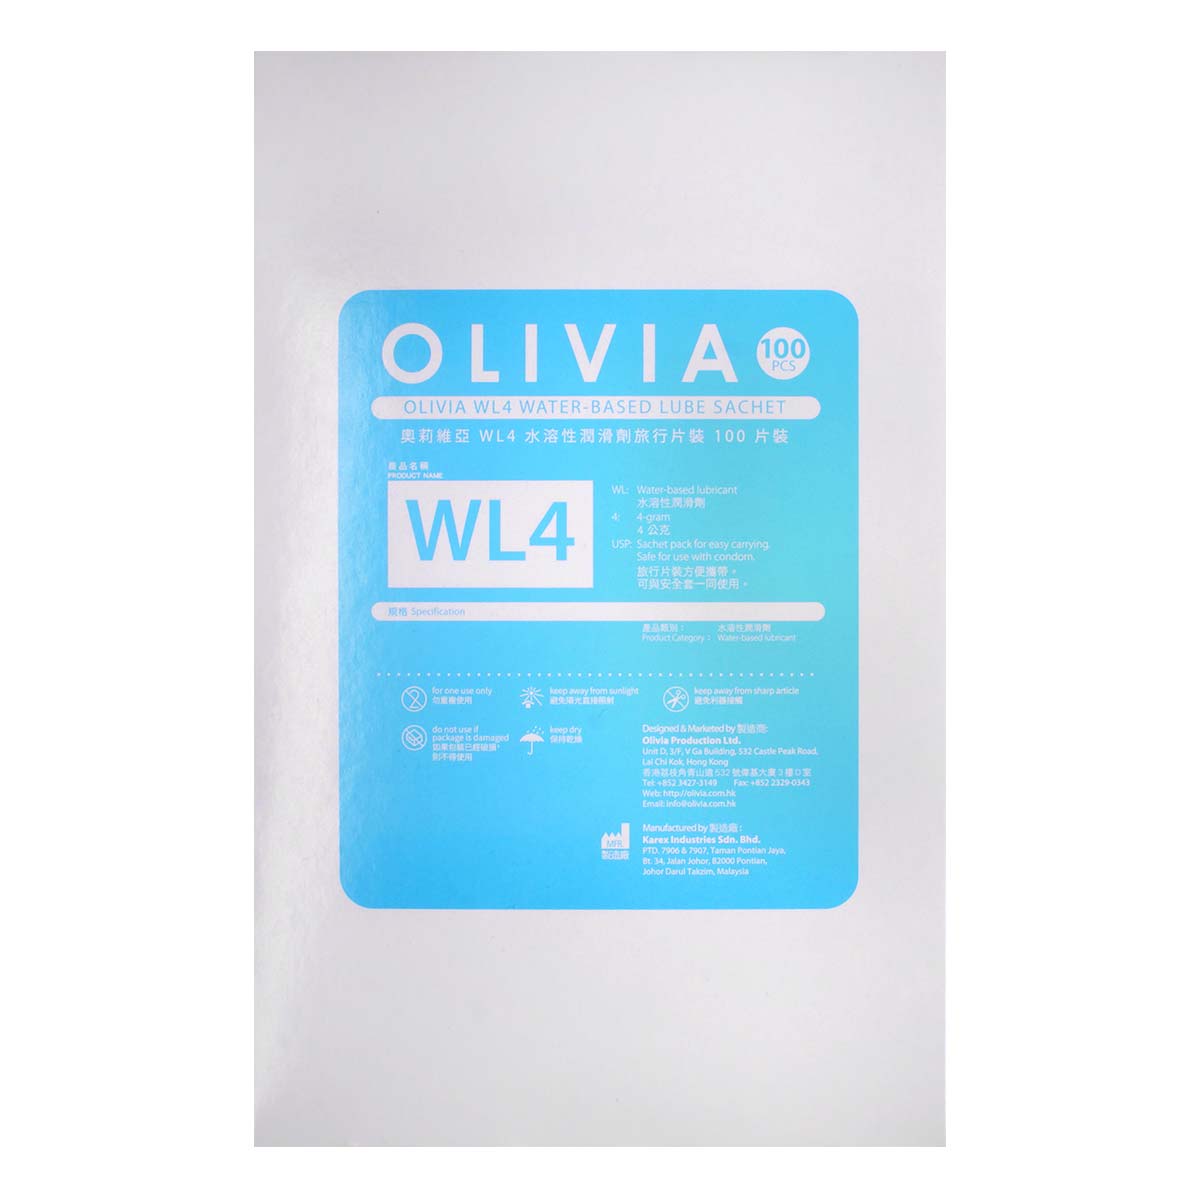 Olivia WL4 sachet 100 pieces Water-based Lubricant (Short Expiry)-p_3